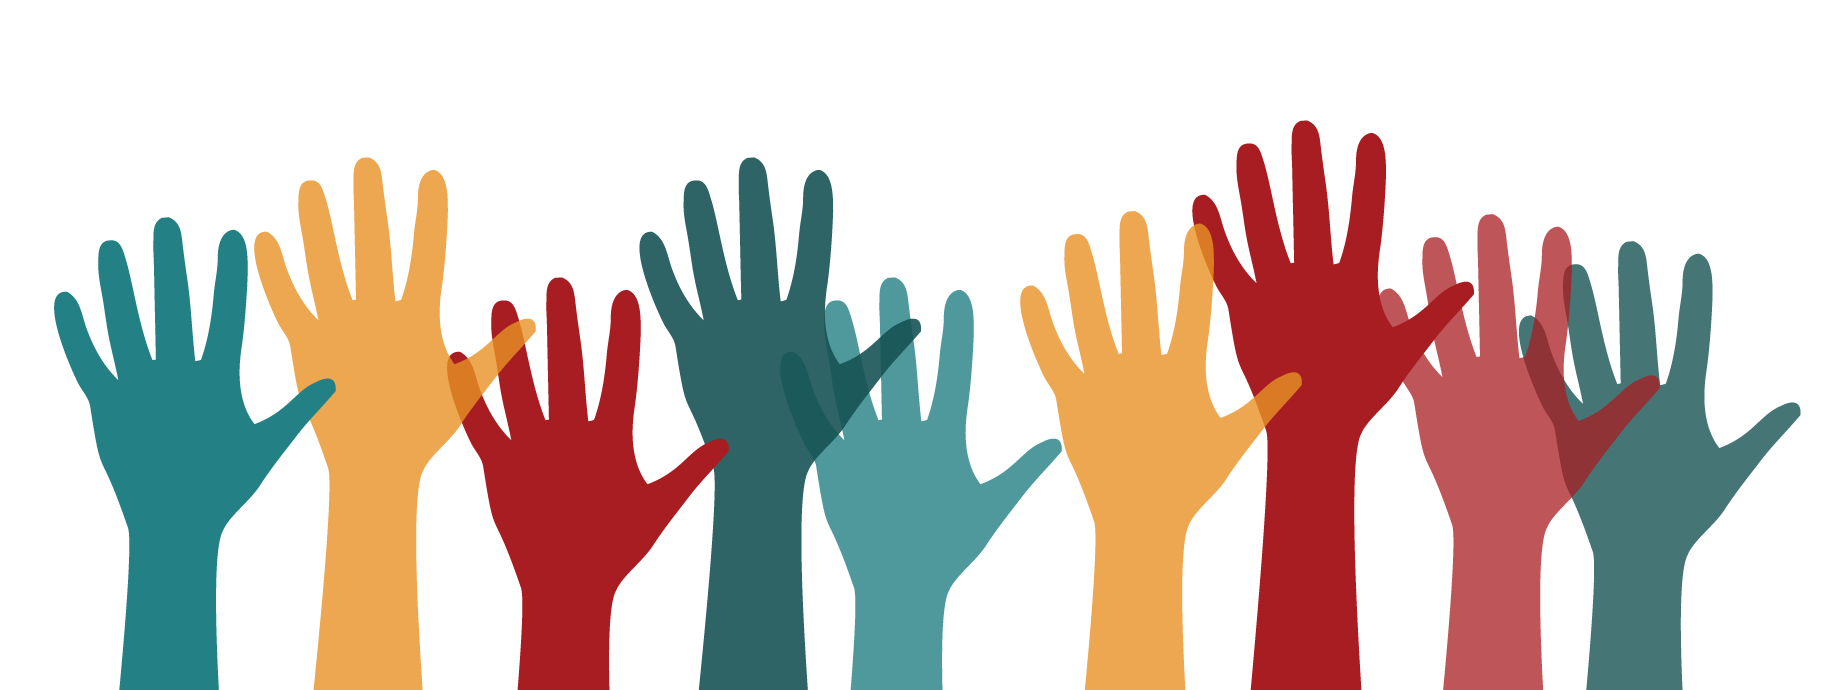 Image showing hands in varying colors outstretched vertically